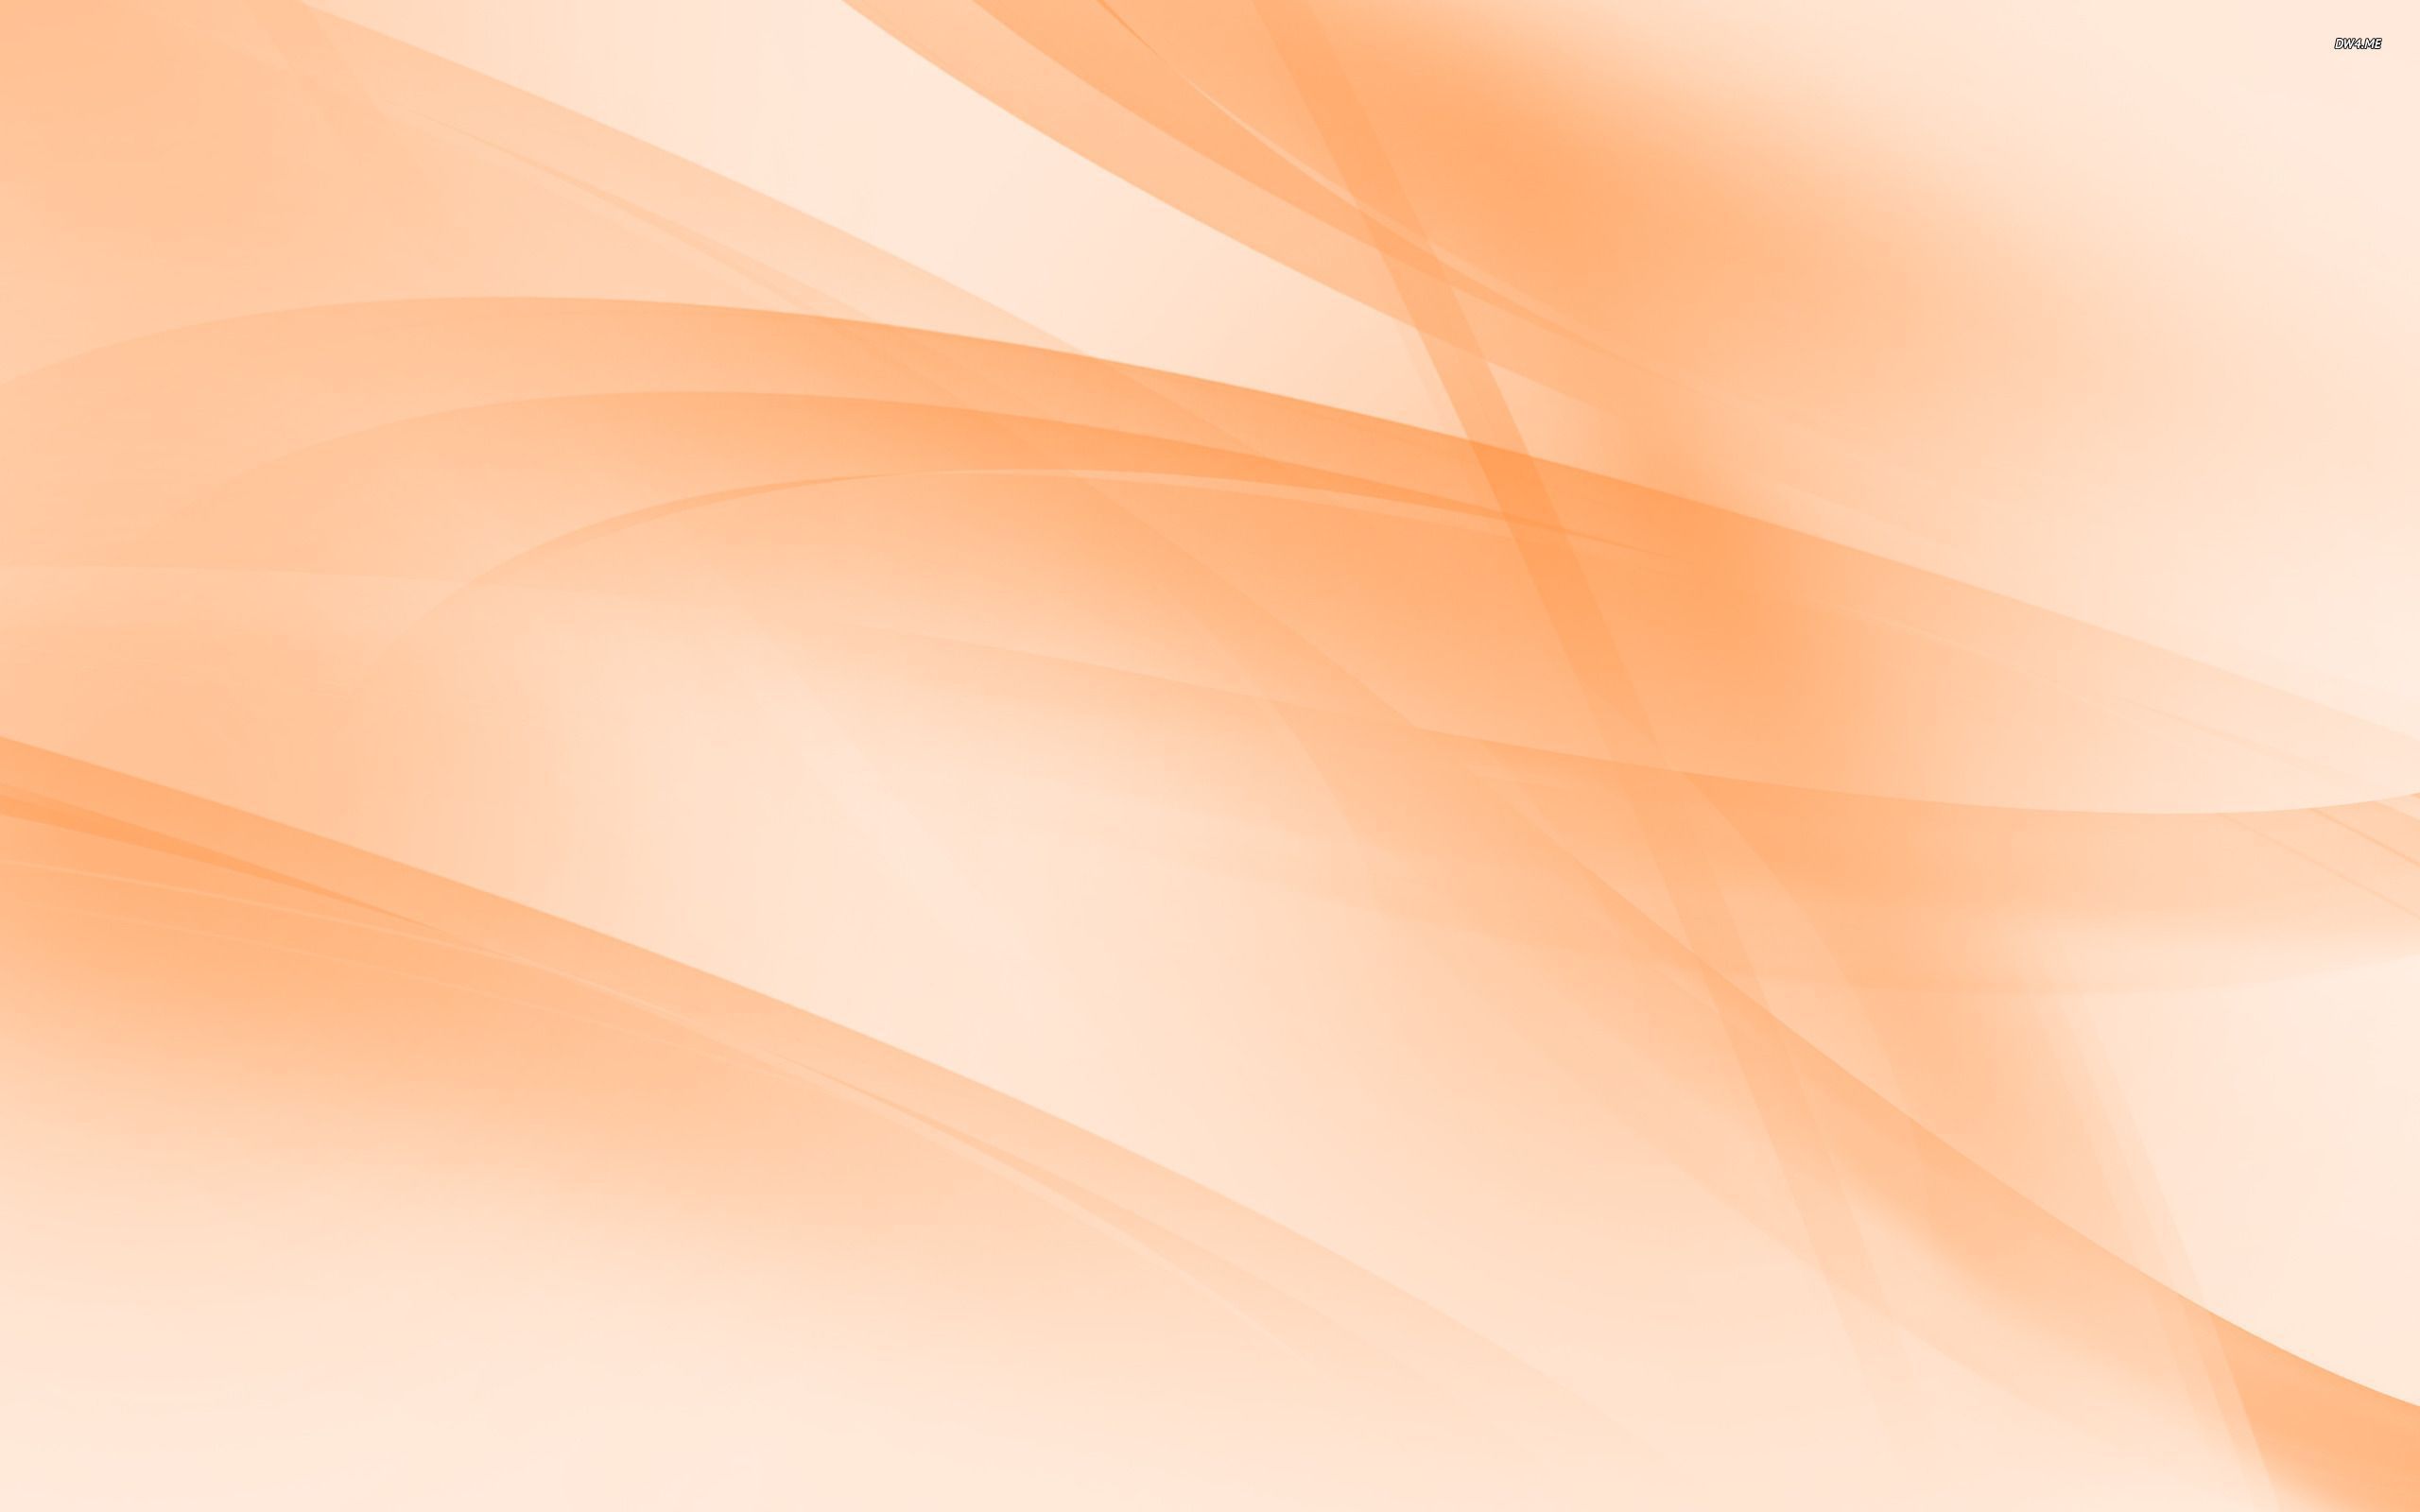 Orange translucent curves wallpaper - Abstract wallpapers - #1819